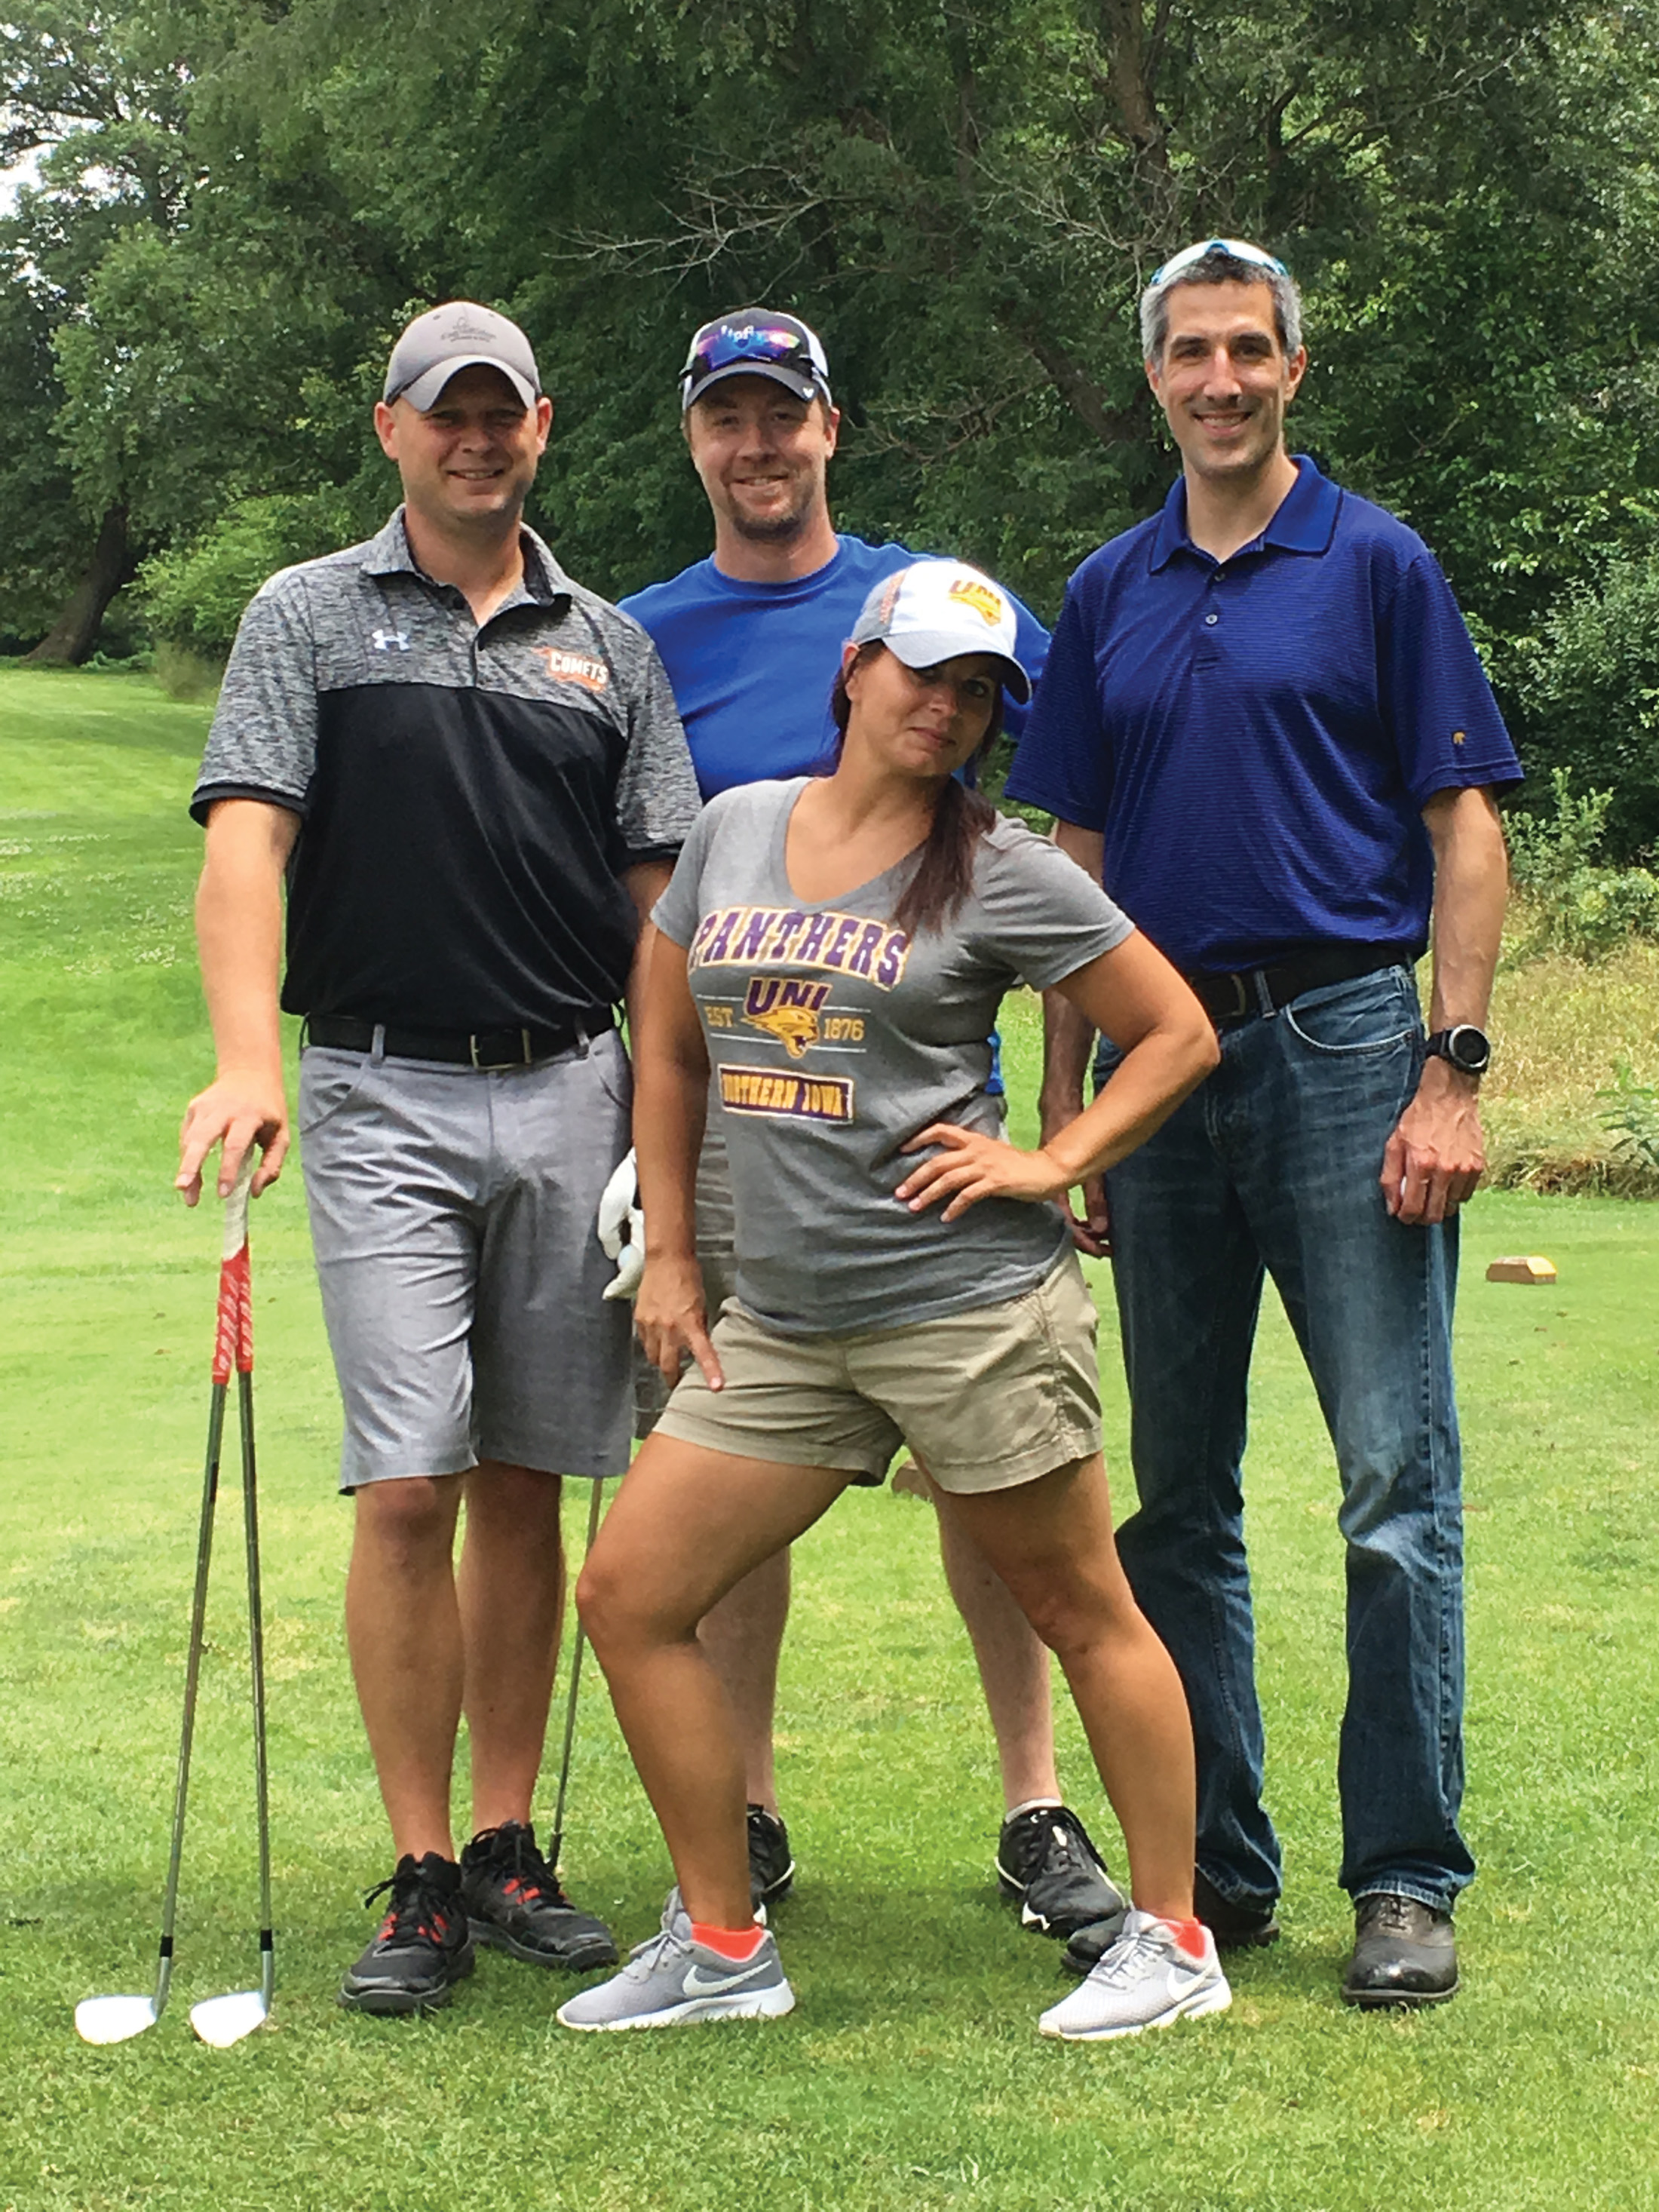 Golf outing held to benefit Comet boys basketball program